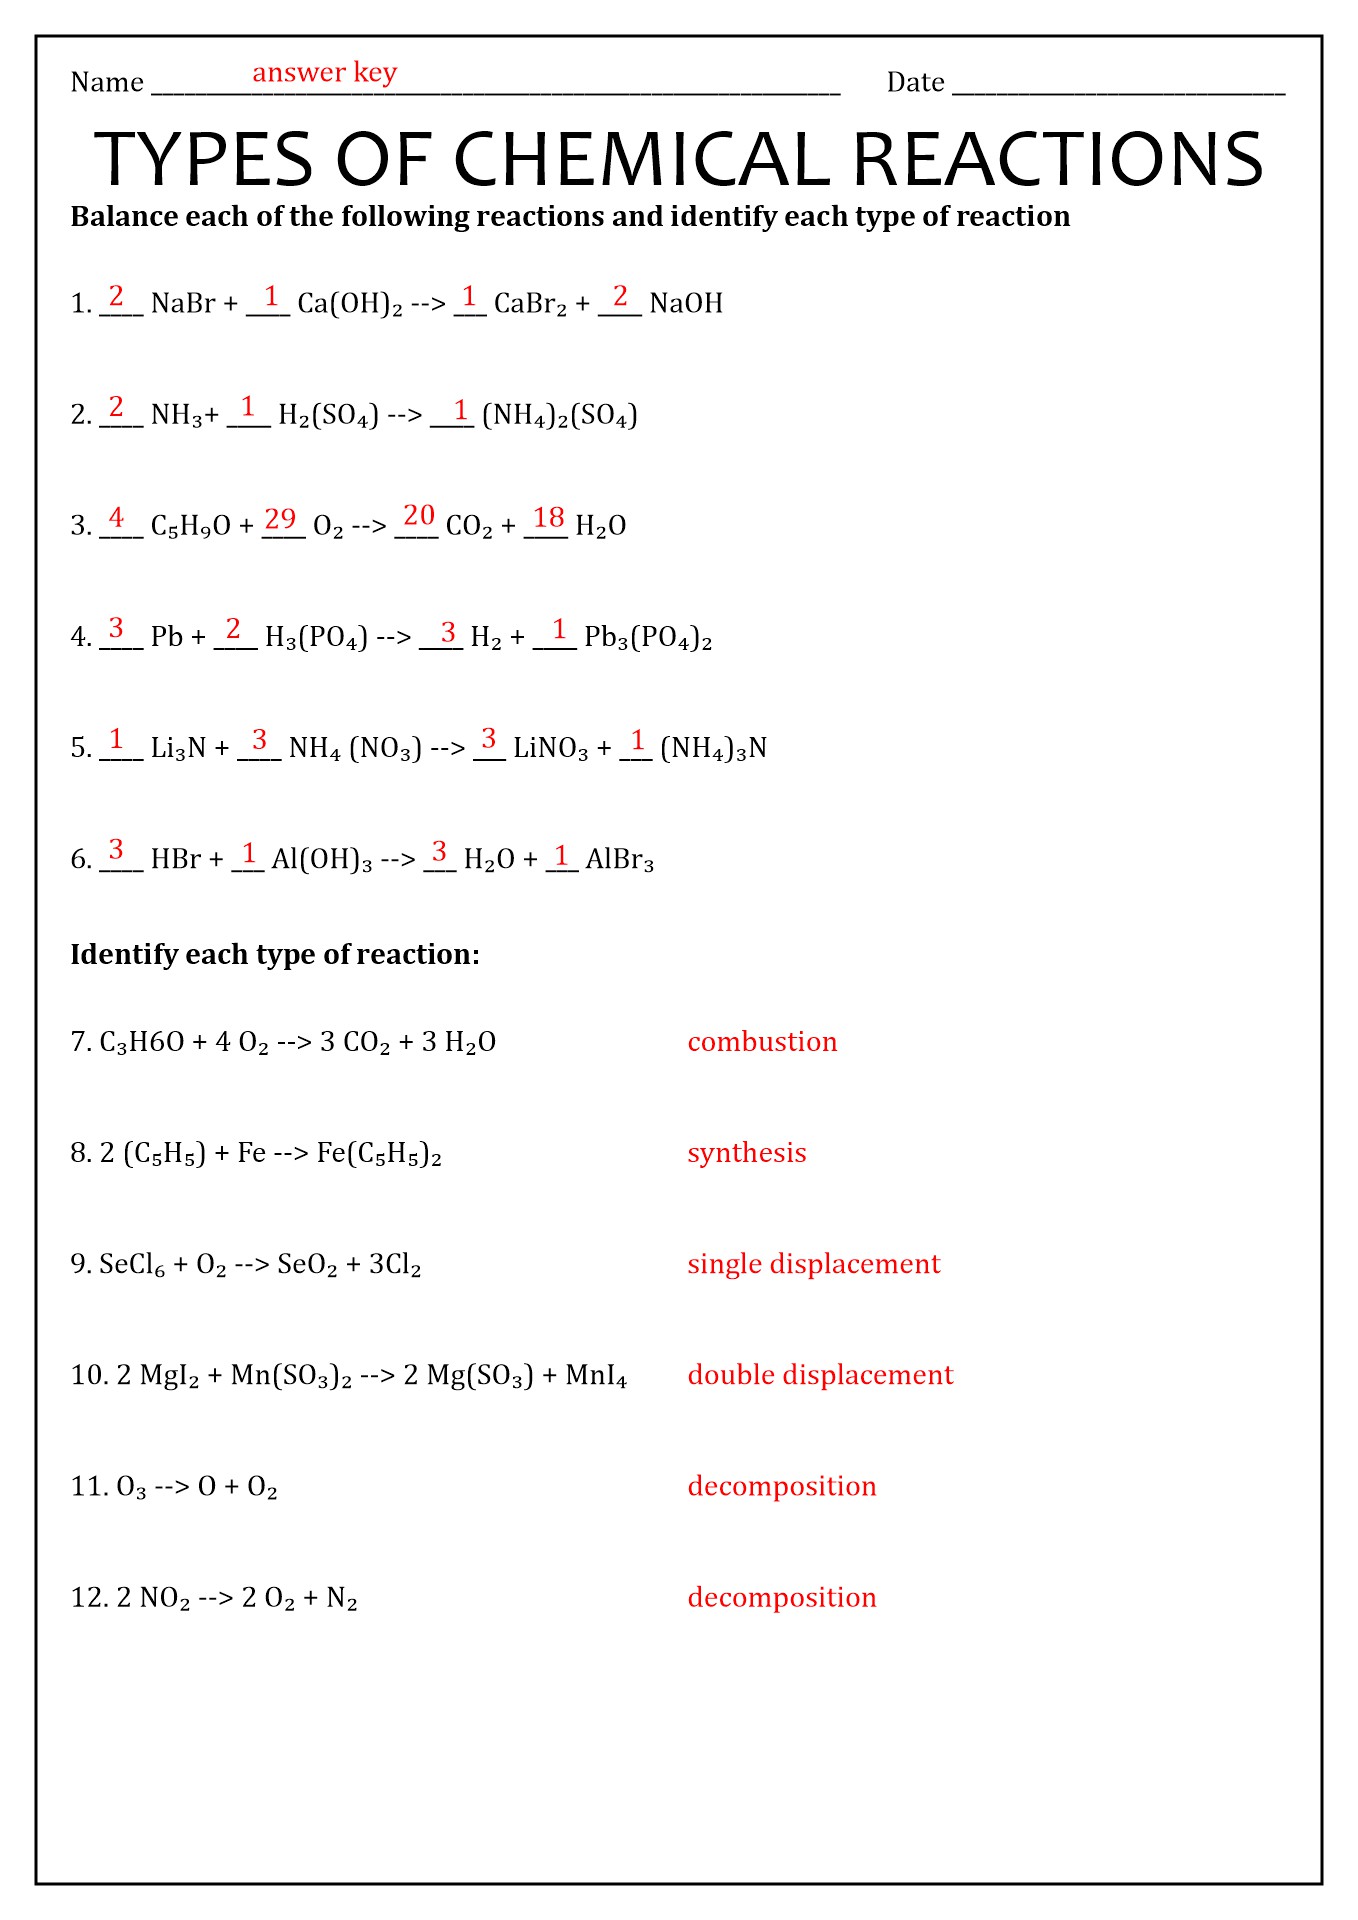 identifying-the-5-types-of-chemical-reactions-worksheet-answers